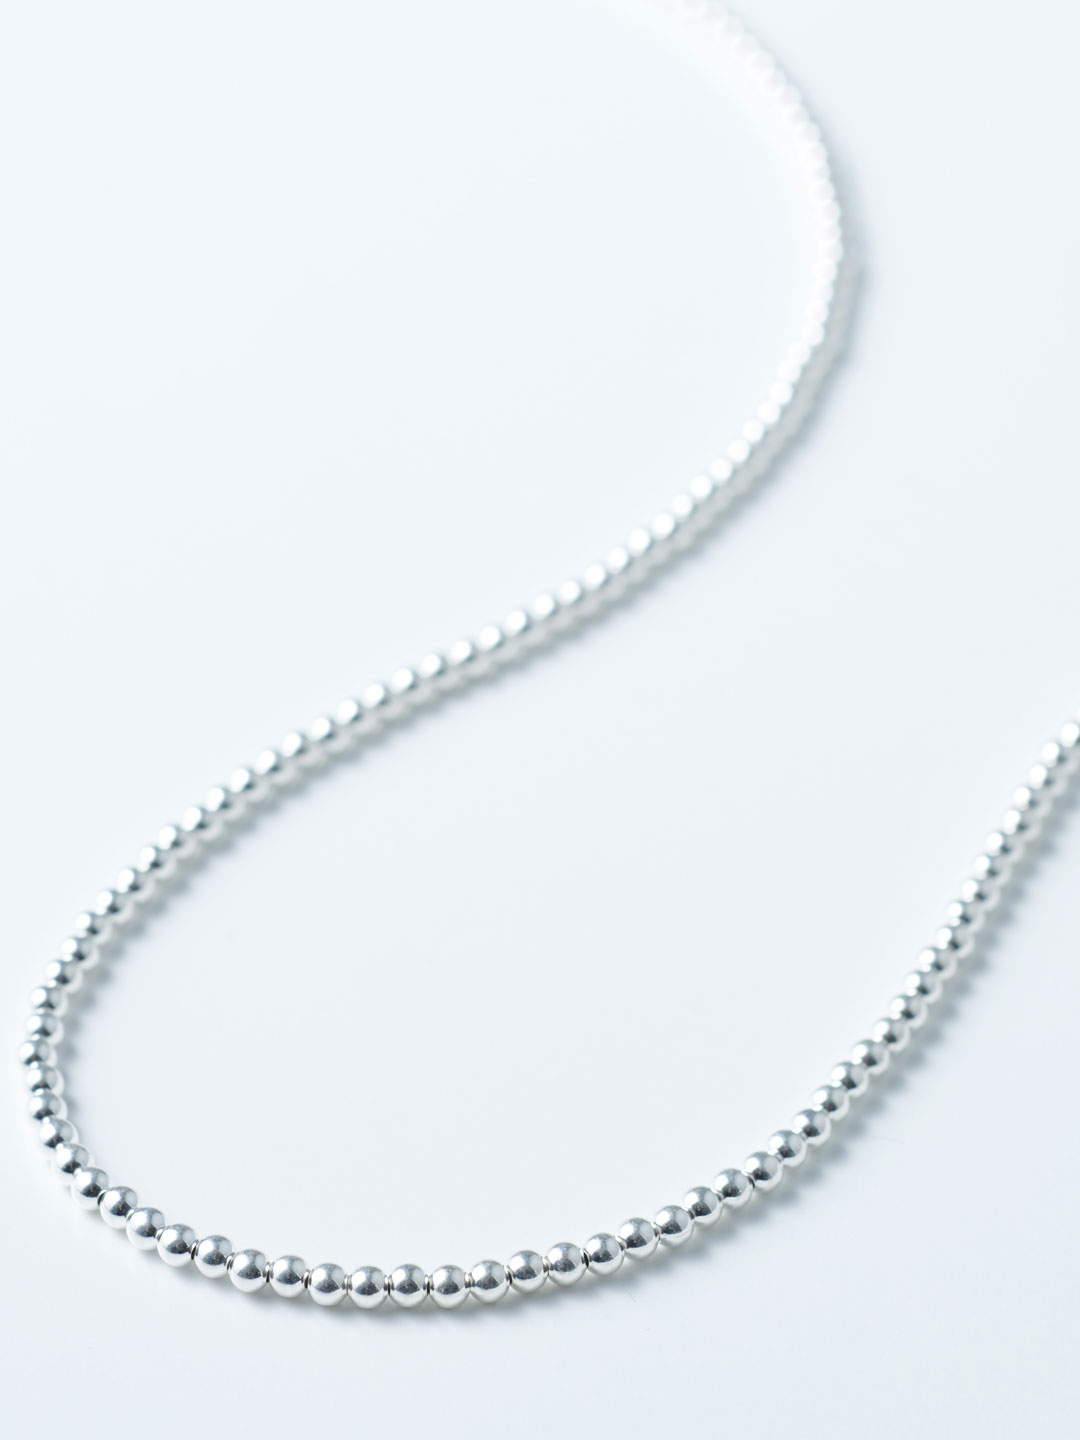 3mm Ball Chain Necklace 91cm  - Silver